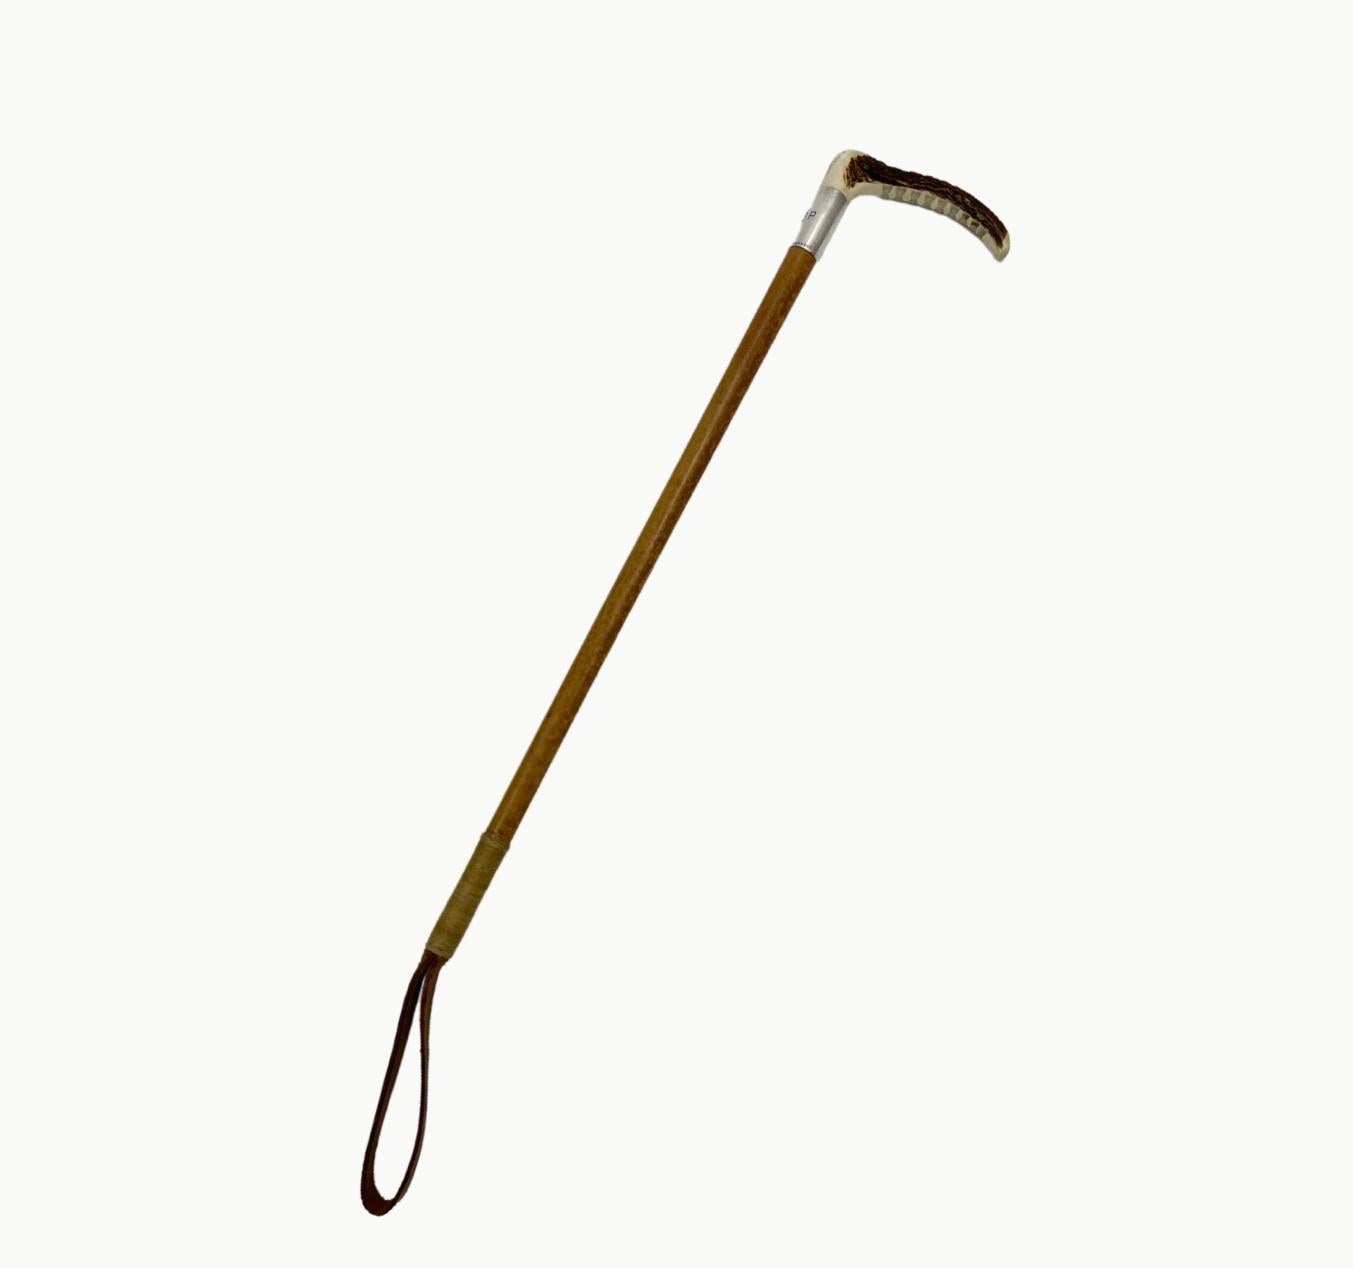 French riding crop, Hermes. Paris, early 20th c., carved antler handle, silver collar monogrammed A.B.P., bamboo cane shaft, lashed leather end. Great vintage condition.

Measurements:

25”L x 4.5. W x 3/4” D.